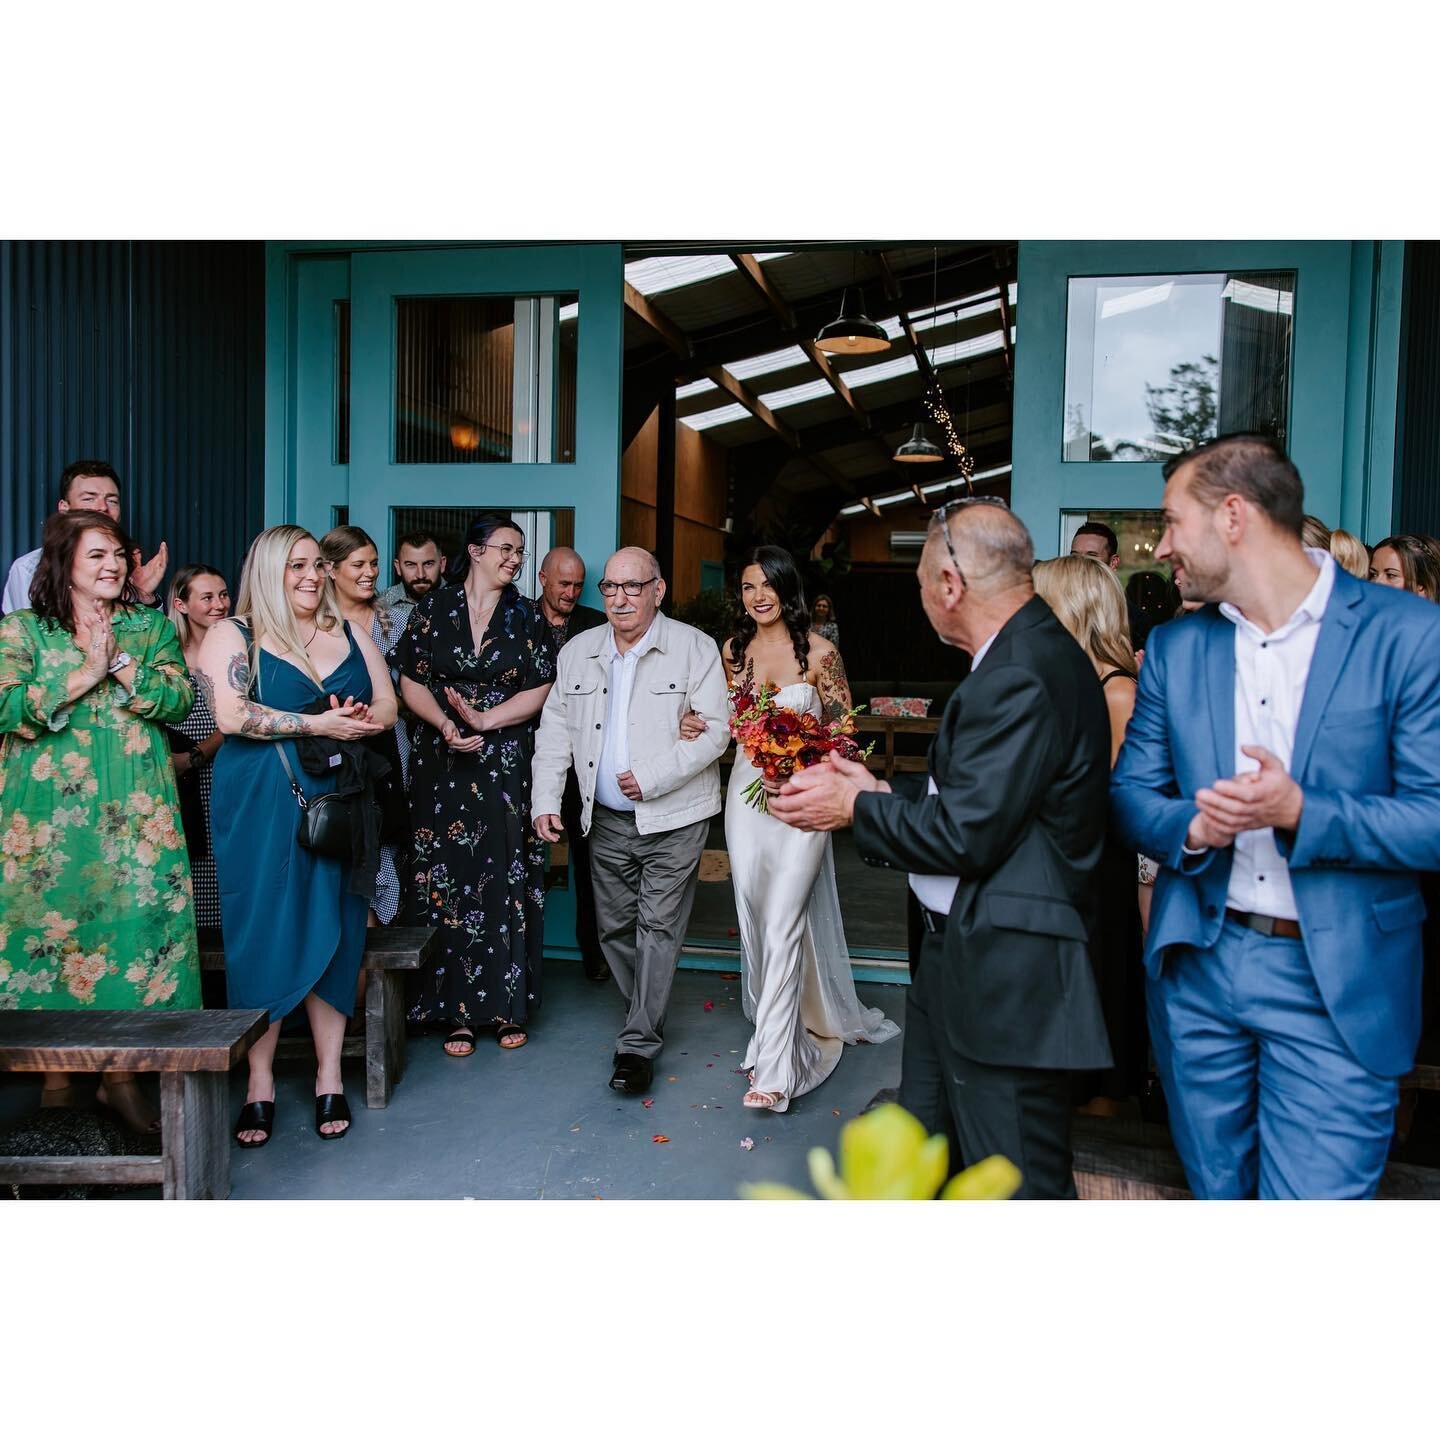 Kristy and Elliot&rsquo;s stunning @ecowednz sustainable wedding 10/10/23
💚
What a day for a wedding&hellip;. Rain ☔️ , sunshine ☀️ , wind 🌬️ and ⛅️- that added to the mood and atmosphere for this gorgeous couple.  @littlewildernessnz is the perfec